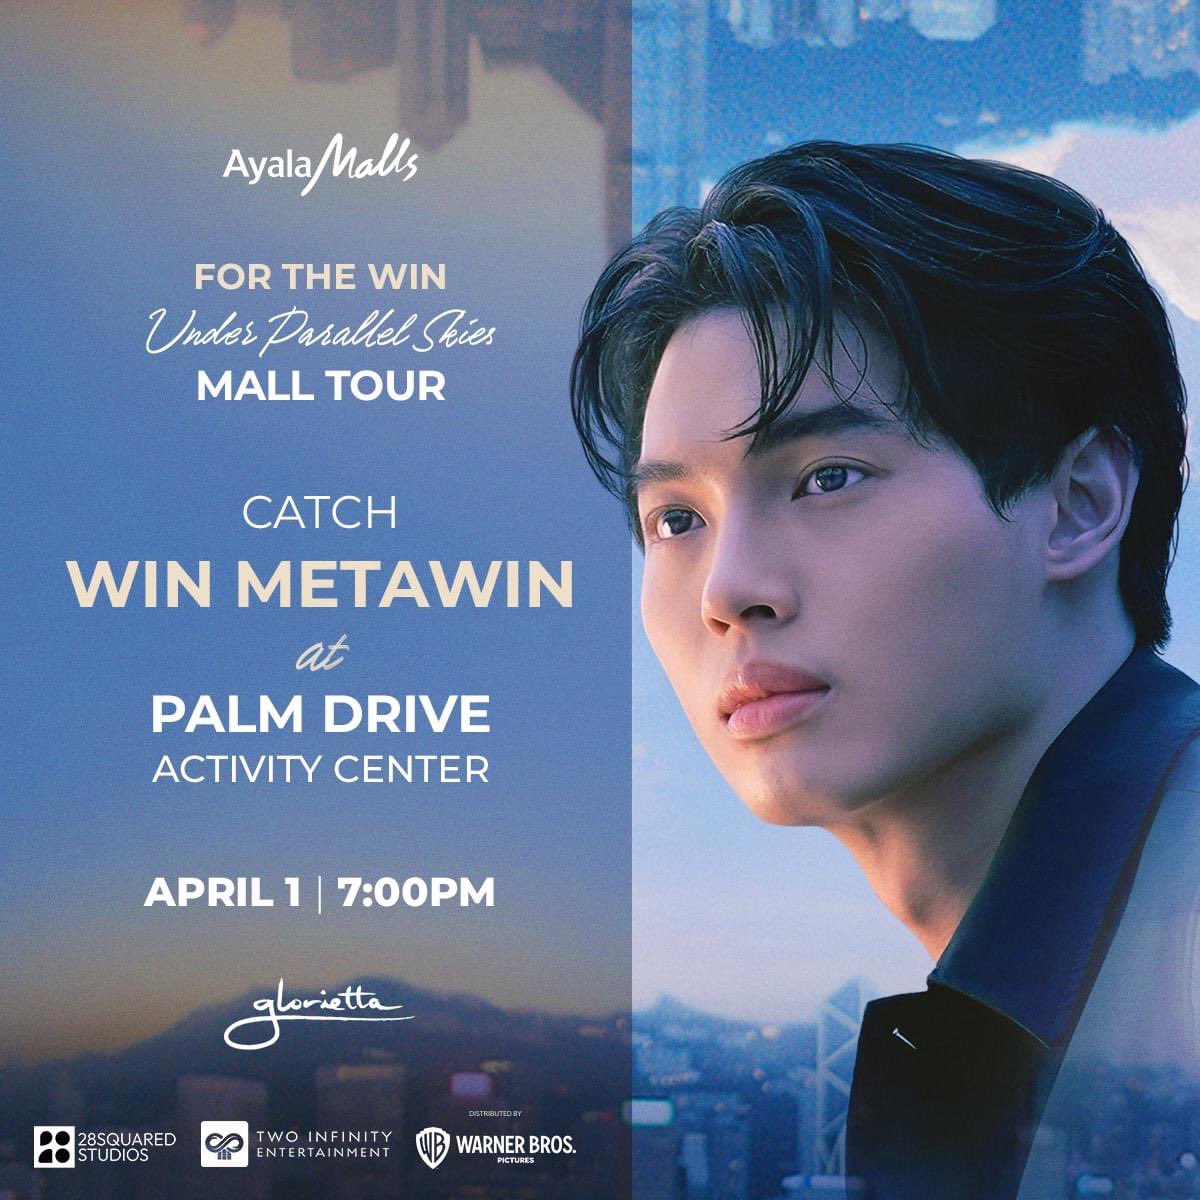 Good news, PH SNOWBALLPOWER! 😍 Win Metawin is ready to join us under the same parallel skies as he brings his 'Under Parallel Skies' Mall Tour to Ayala Malls Glorietta, on April 1, 7:00 PM, at the Palm Drive Activity Center. ❤️ Stay tuned for more updates and see you there!